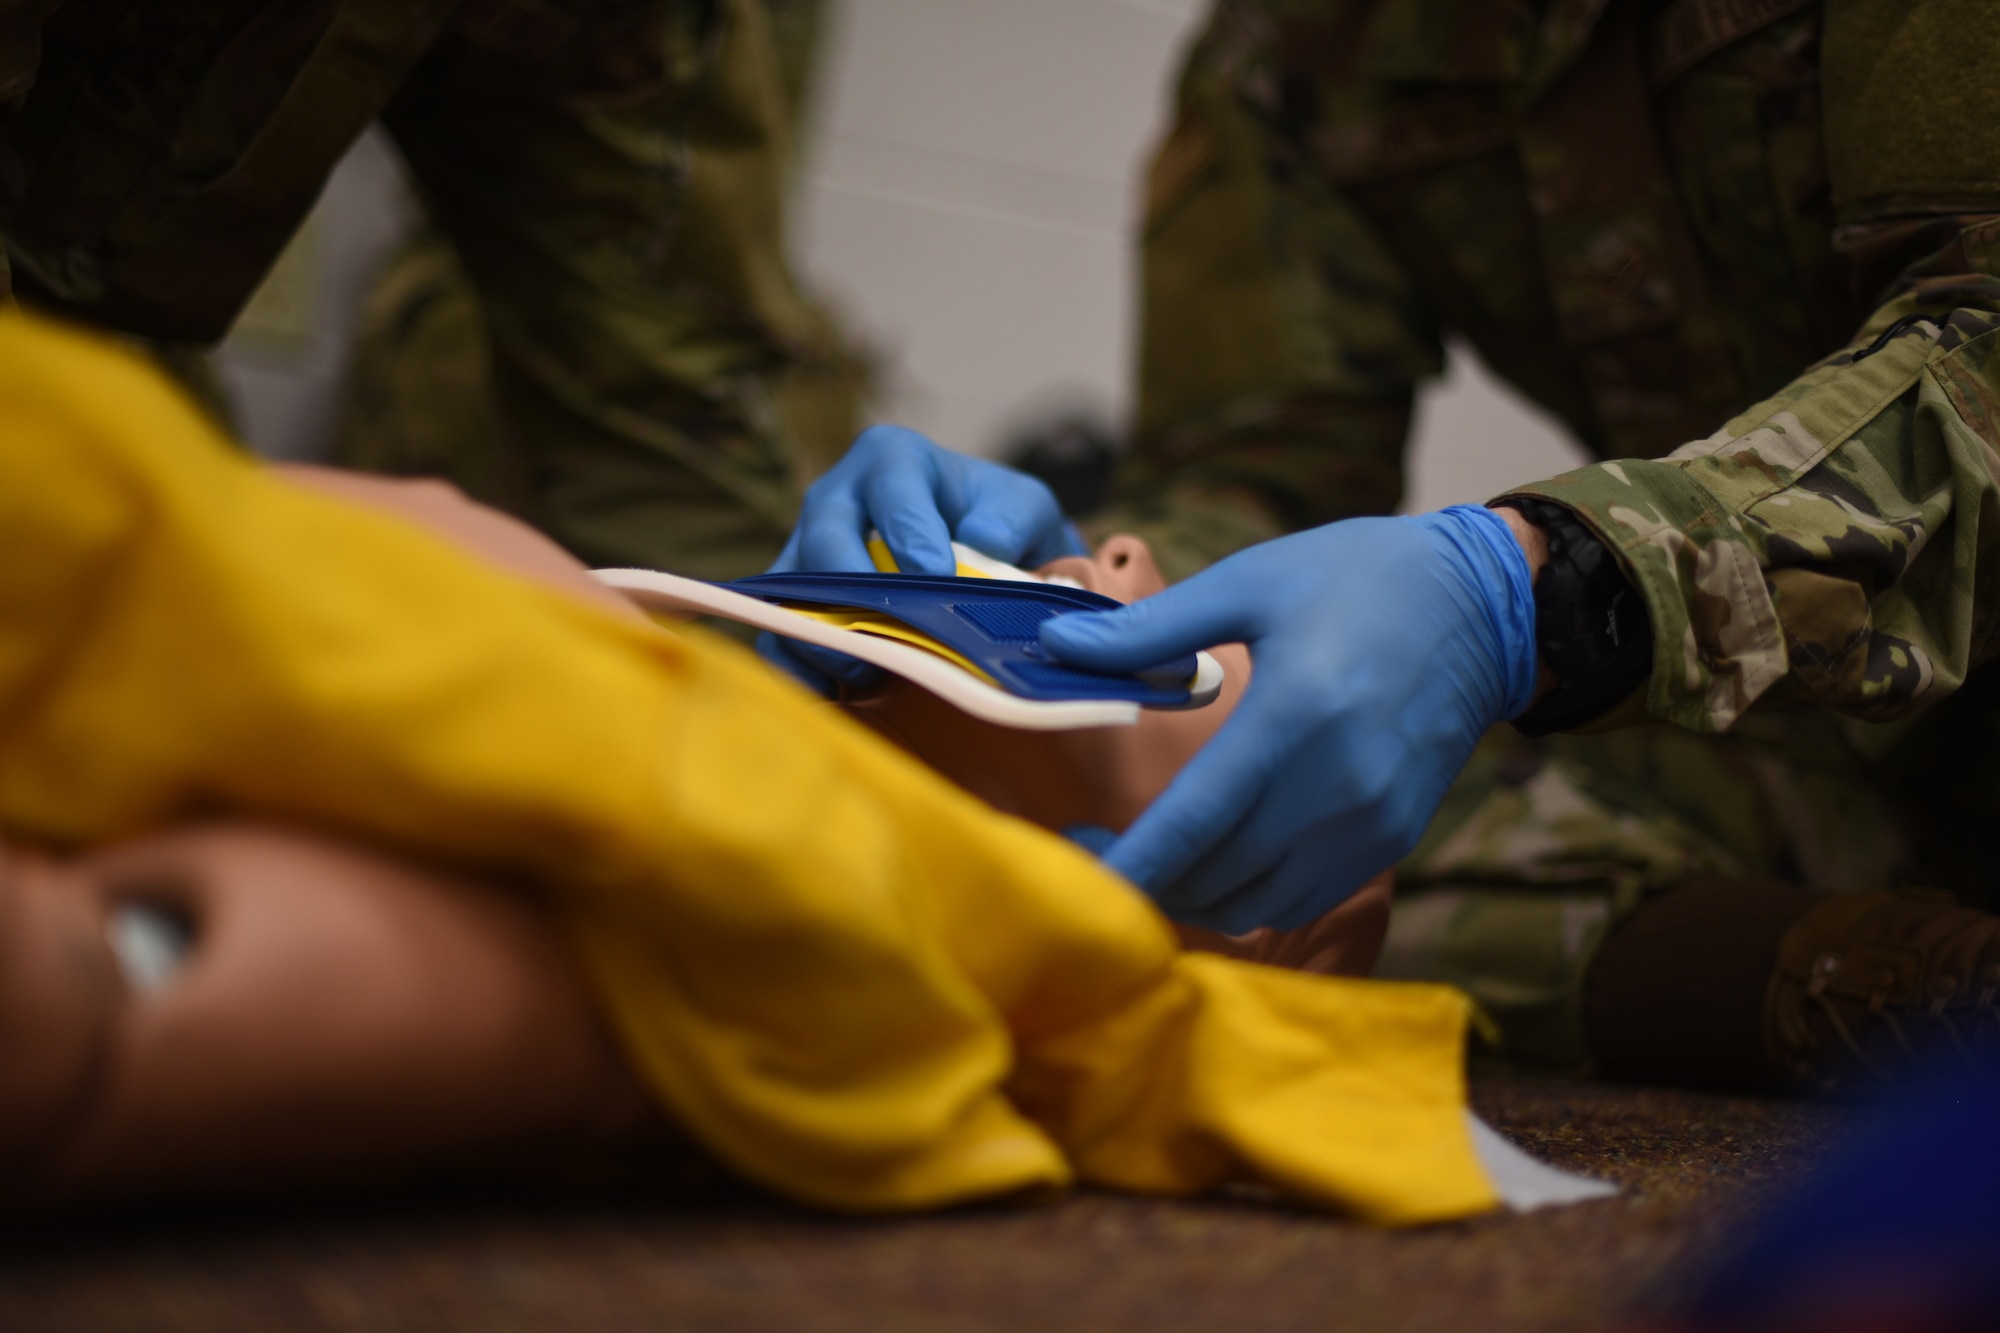 U.S. Air Force Airman 1st Class Joshua Jimenez, 312th Training Squadron student, applies a C-collar to stabilize a simulated victim’s spine, during an emergency medical responder psychomotor skills evaluation at Goodfellow Air Force Base, Texas, May 6, 2022. Students who successfully complete the 68-academic training days at Louis F. Garland Department of Defense Fire Academy, graduate and begin their career with five national certifications. (U.S. Air Force photo by Senior Airman Abbey Rieves)